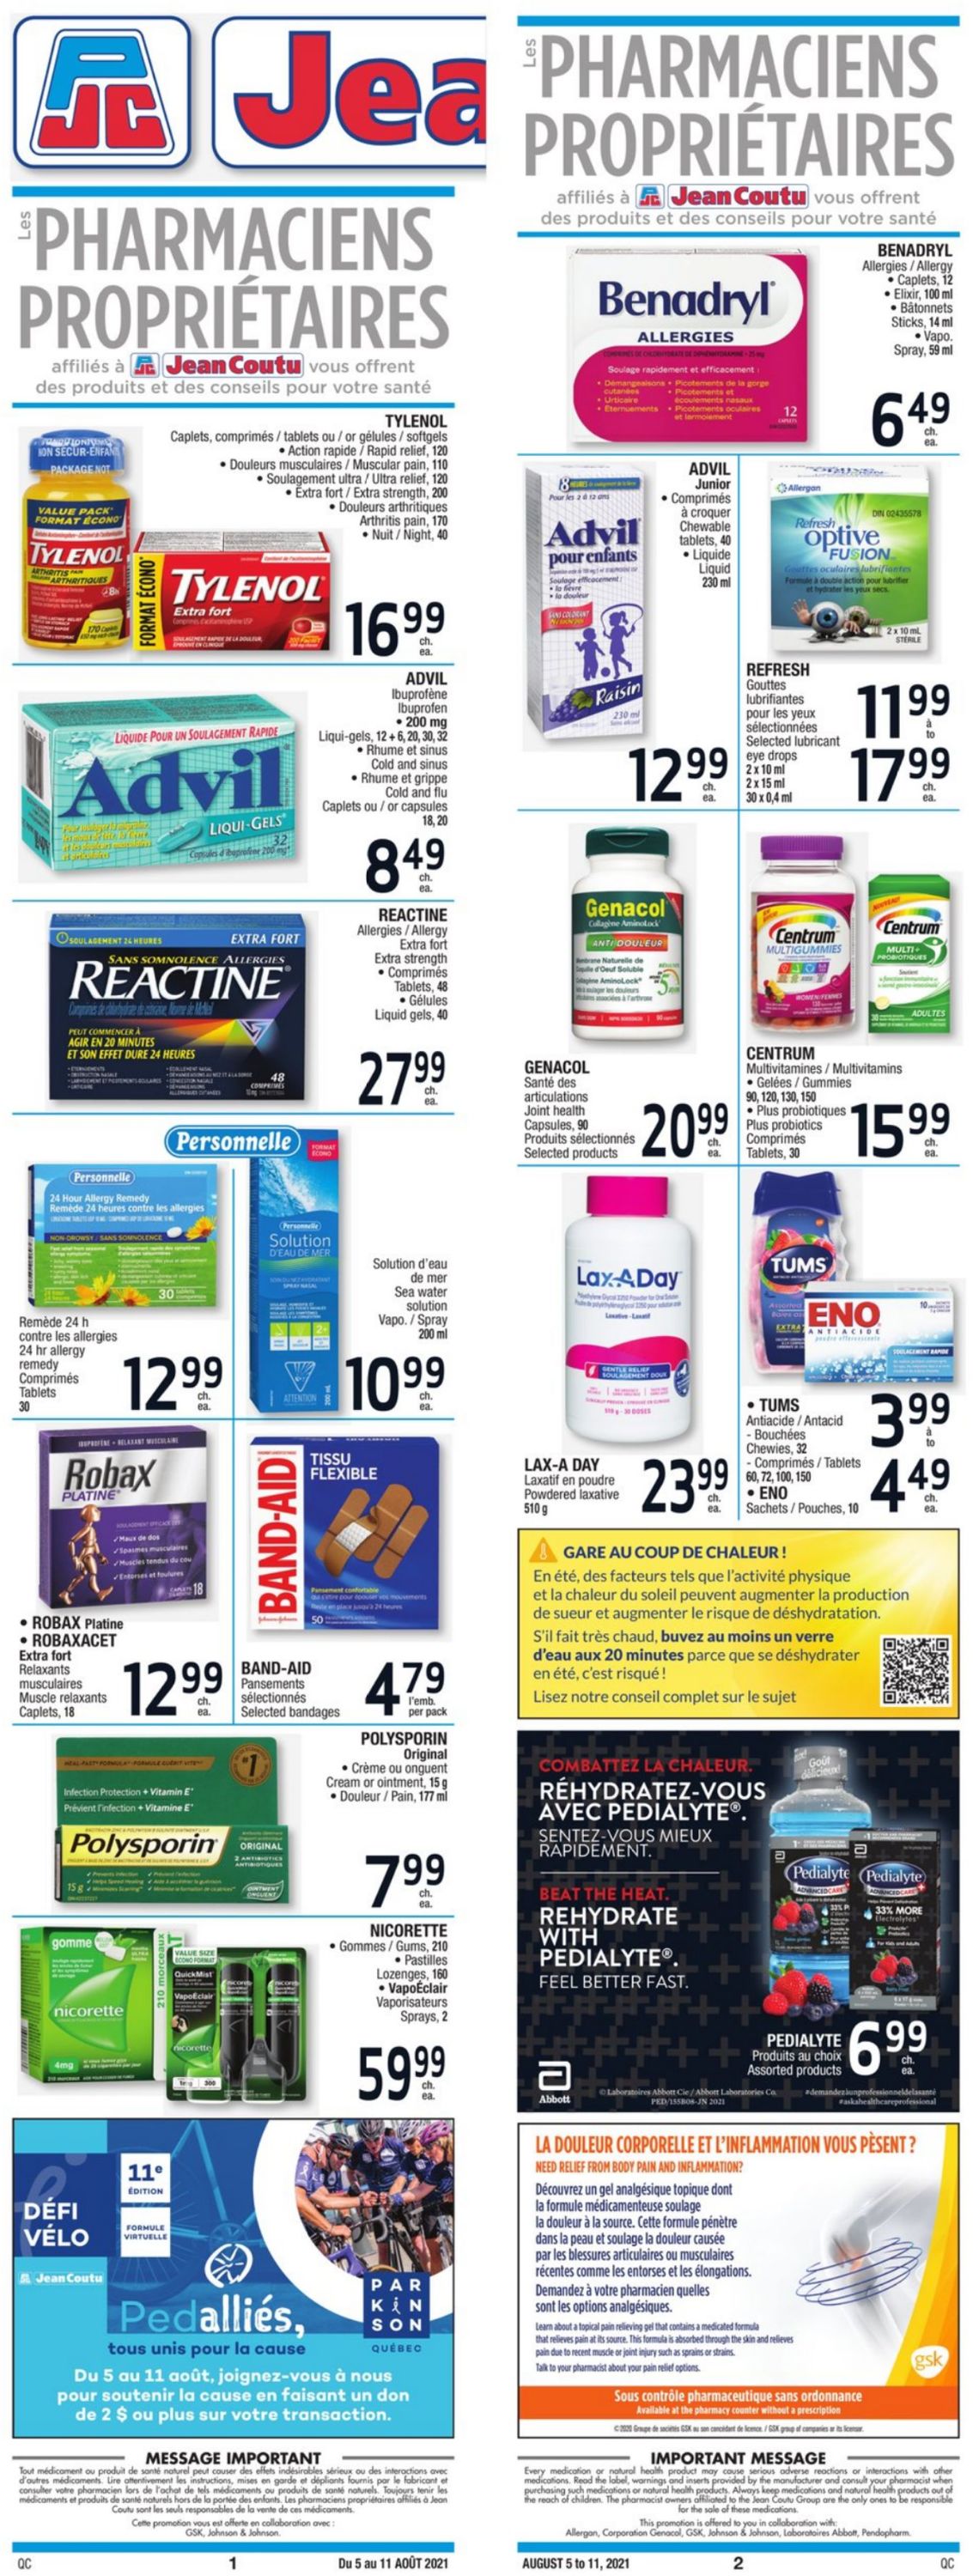 Jean Coutu Flyer from 08/05/2021